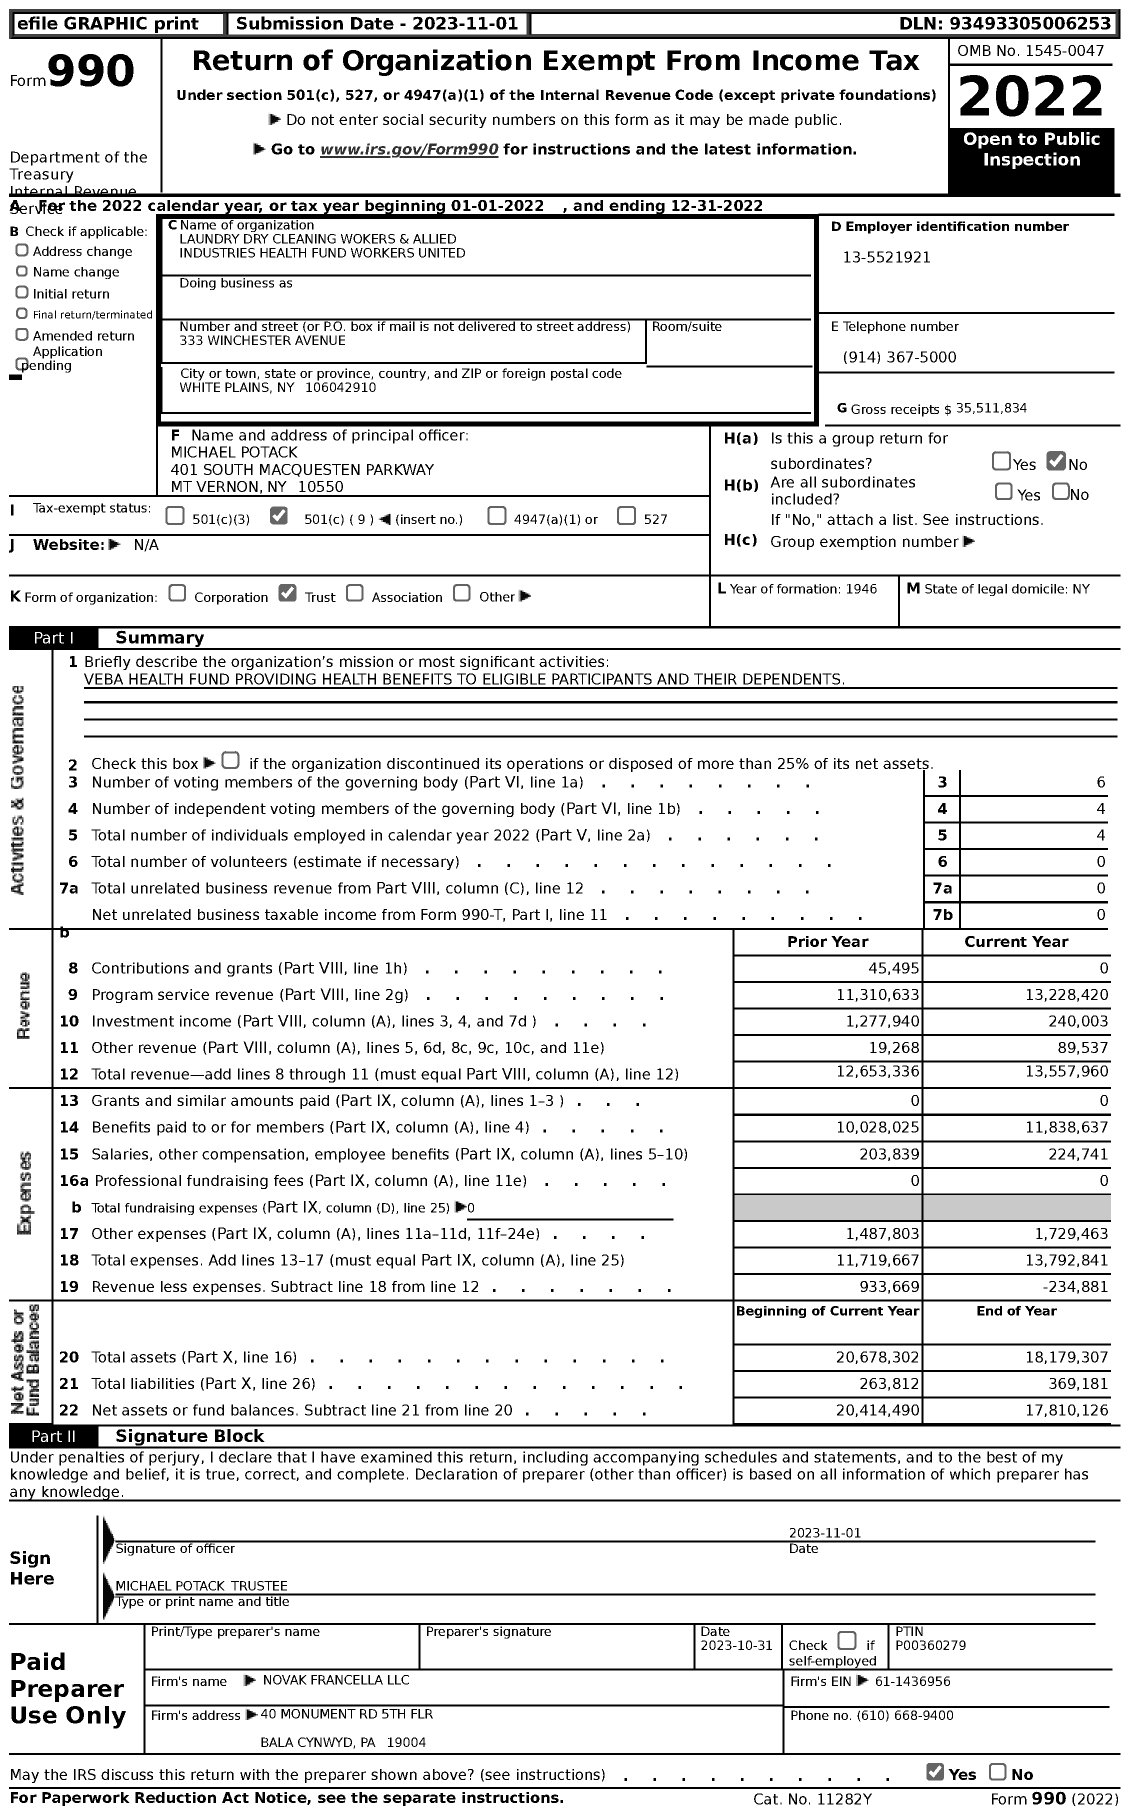 Image of first page of 2022 Form 990 for LAUNDRY DRY CLEANING Wokers and Allied INDUSTRIES HEALTH FUND WORKERS united